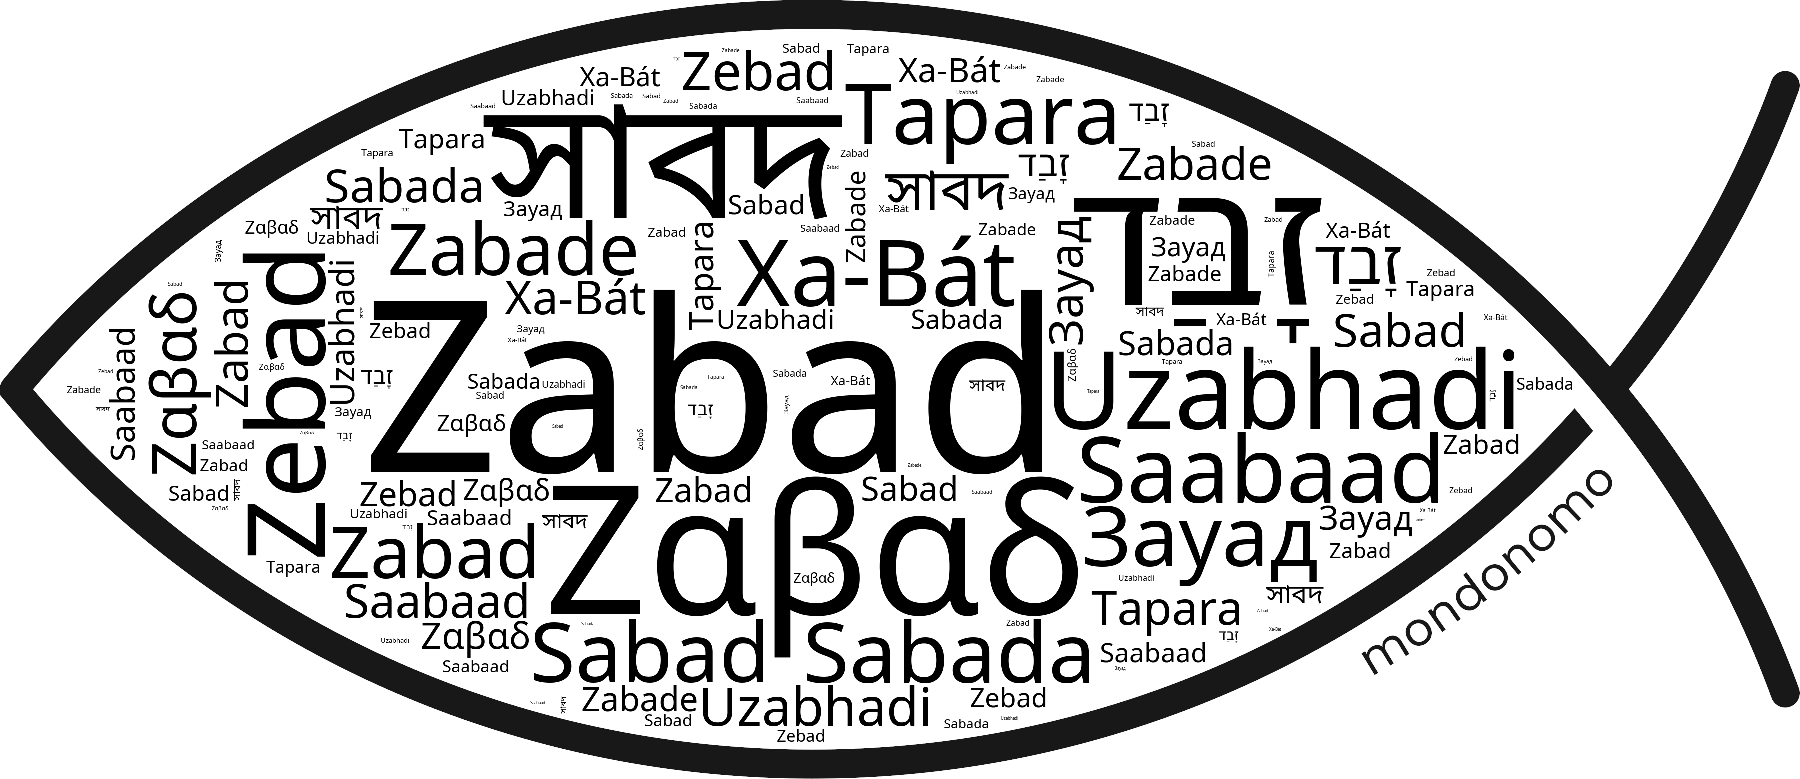 Name Zabad in the world's Bibles